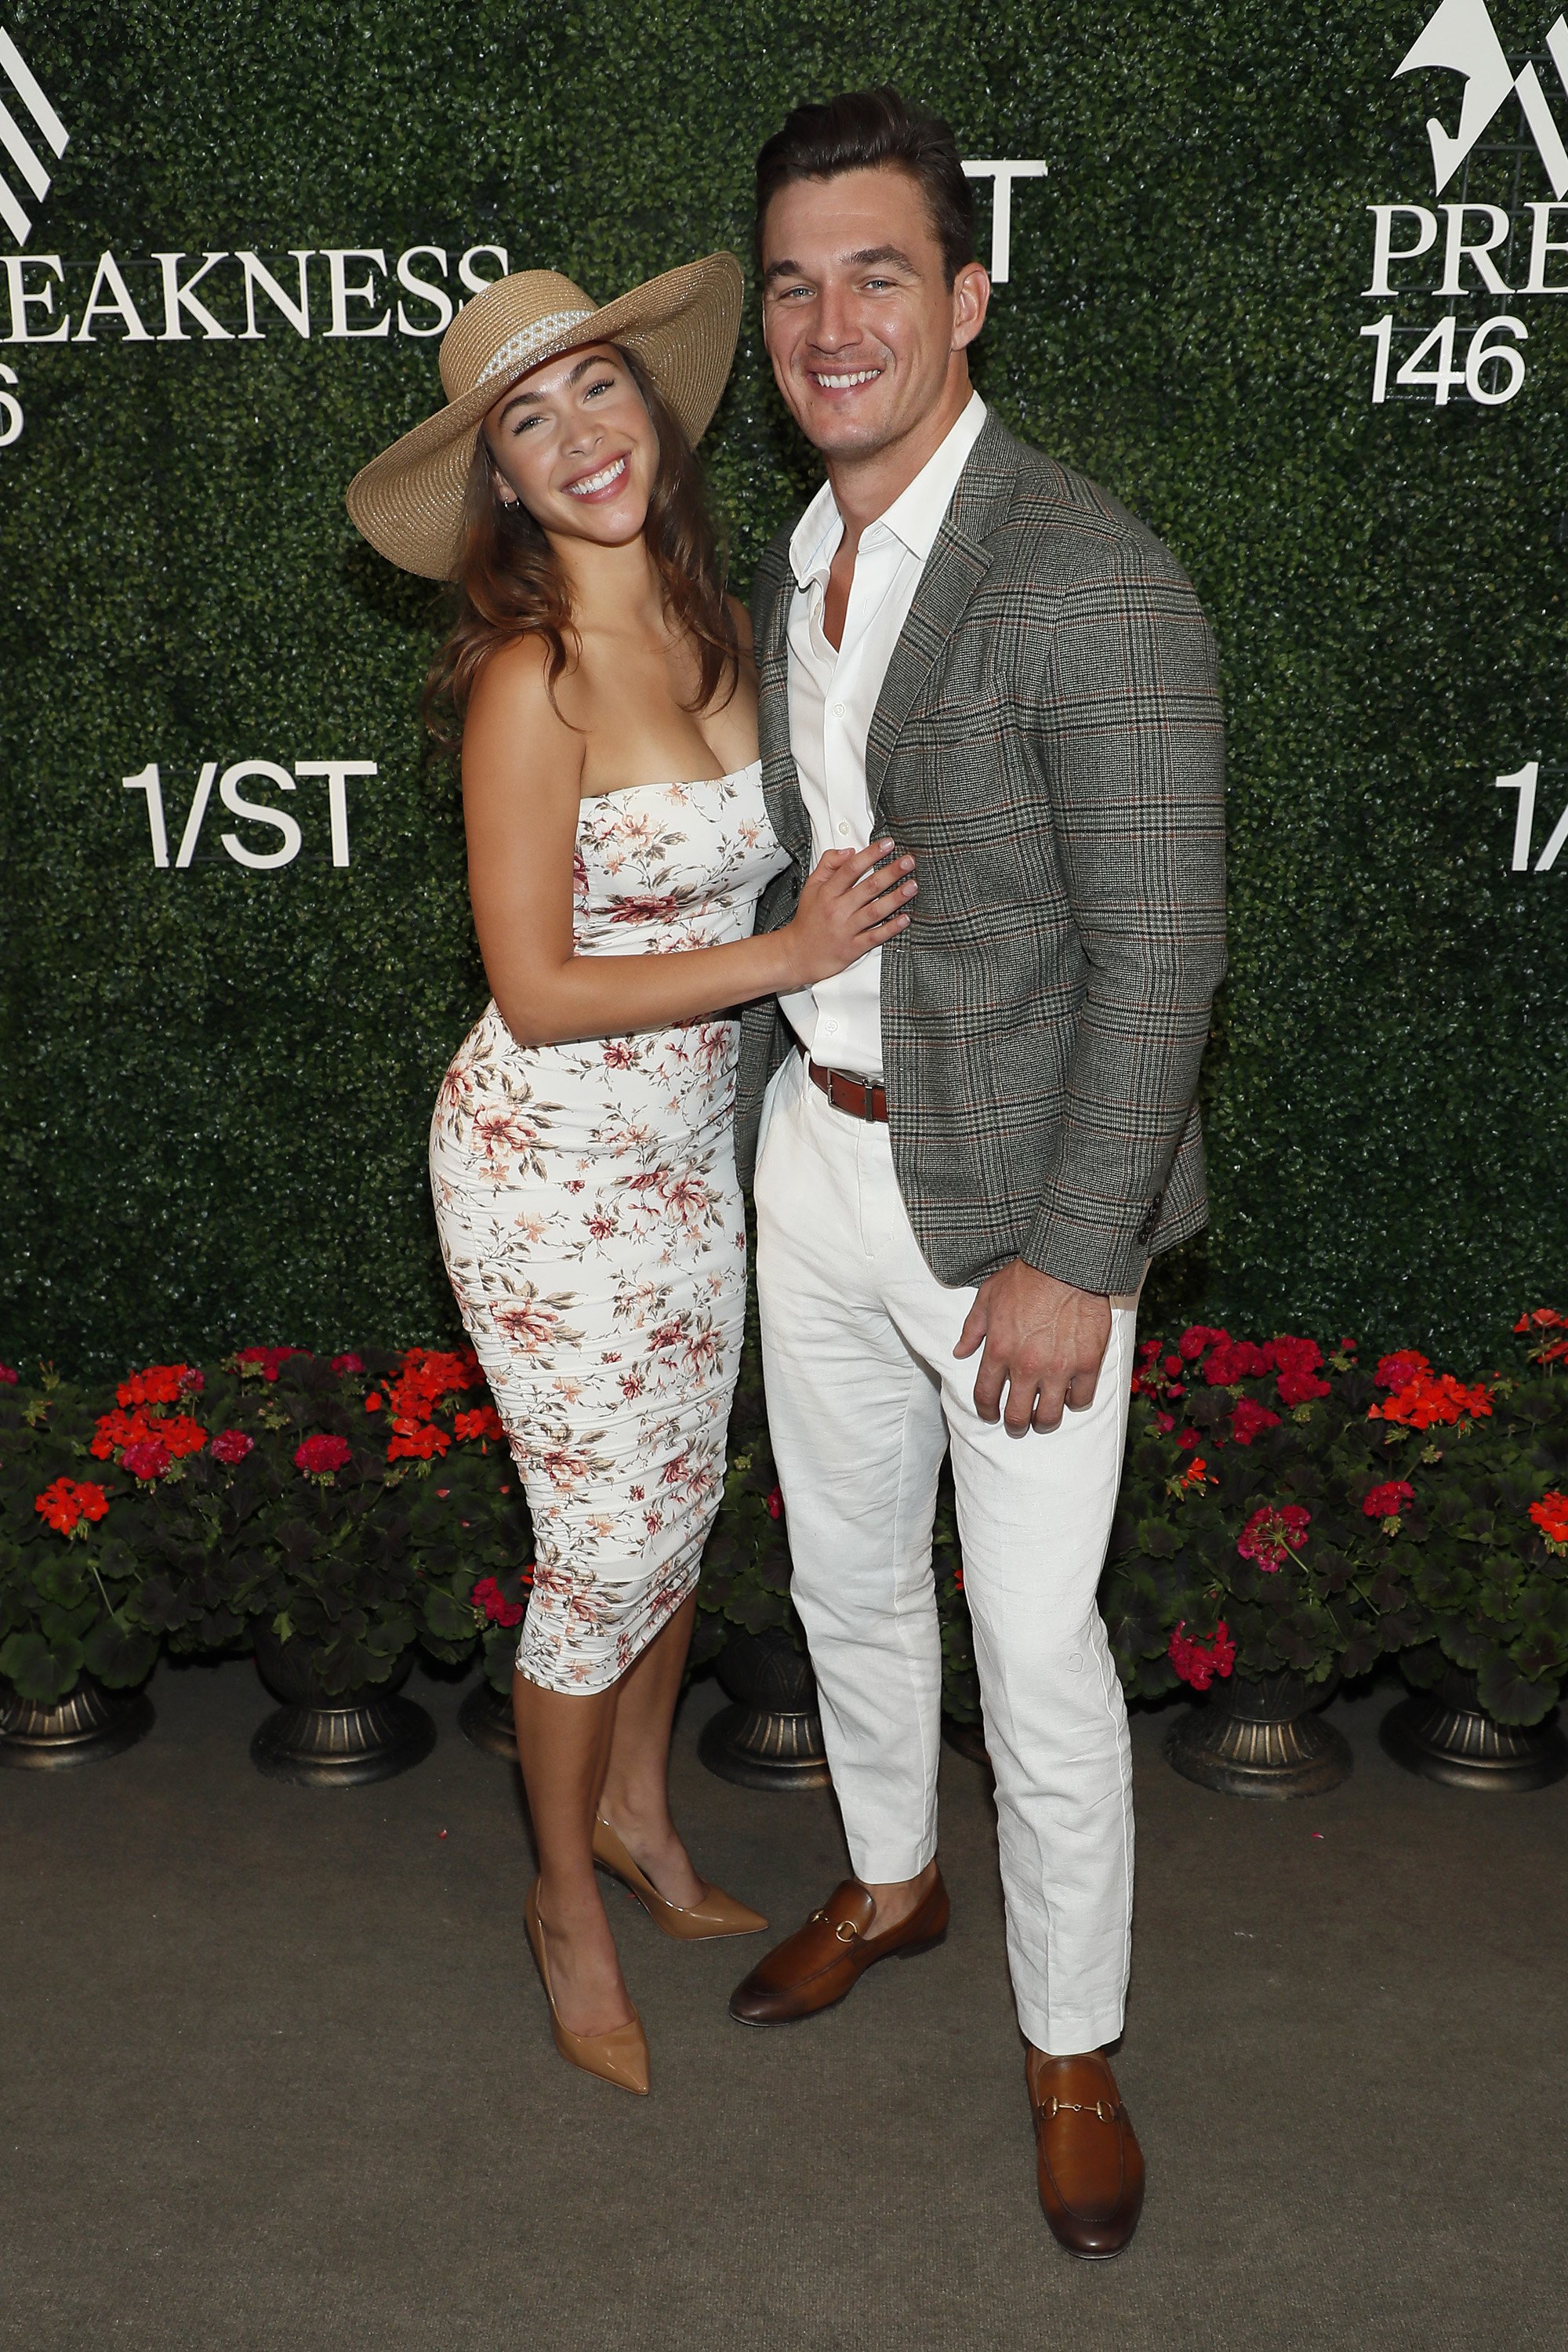 Tyler Cameron and Camila Kendra at Preakness 146 hosted by 1/ST at Pimlico Race Course in Baltimore, Maryland | Photo: Paul Morigi/Getty Images for The Stronach Group